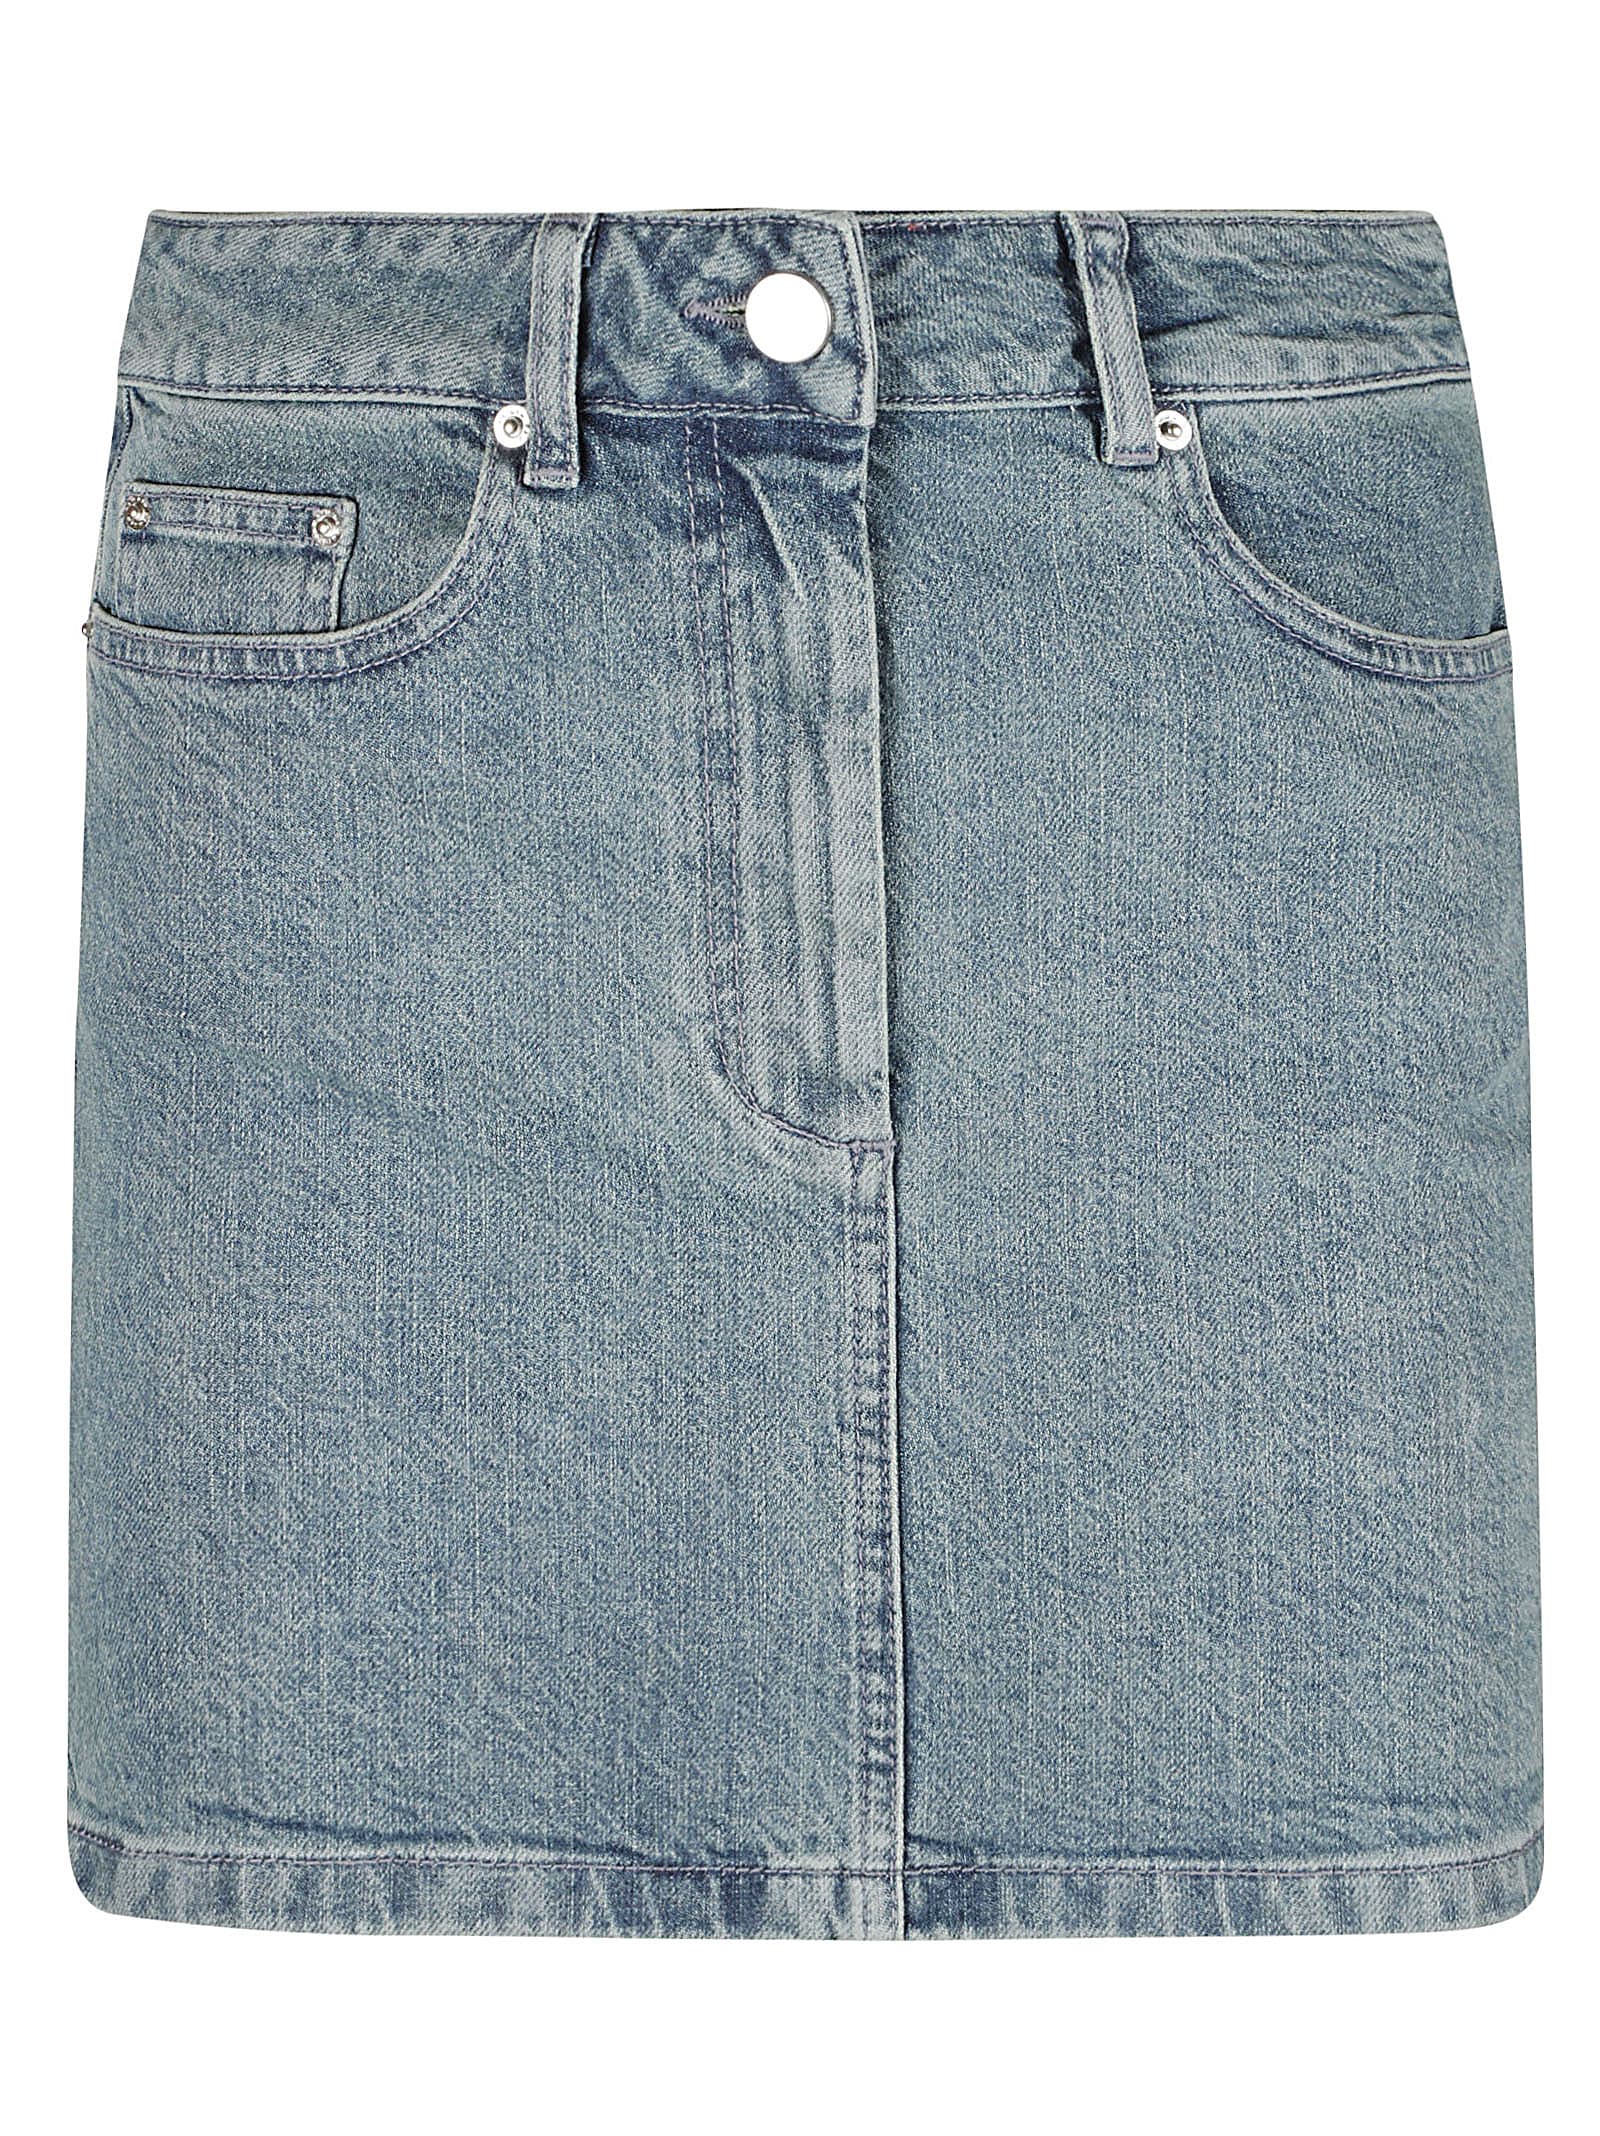 Classic Fitted Denim Skirt